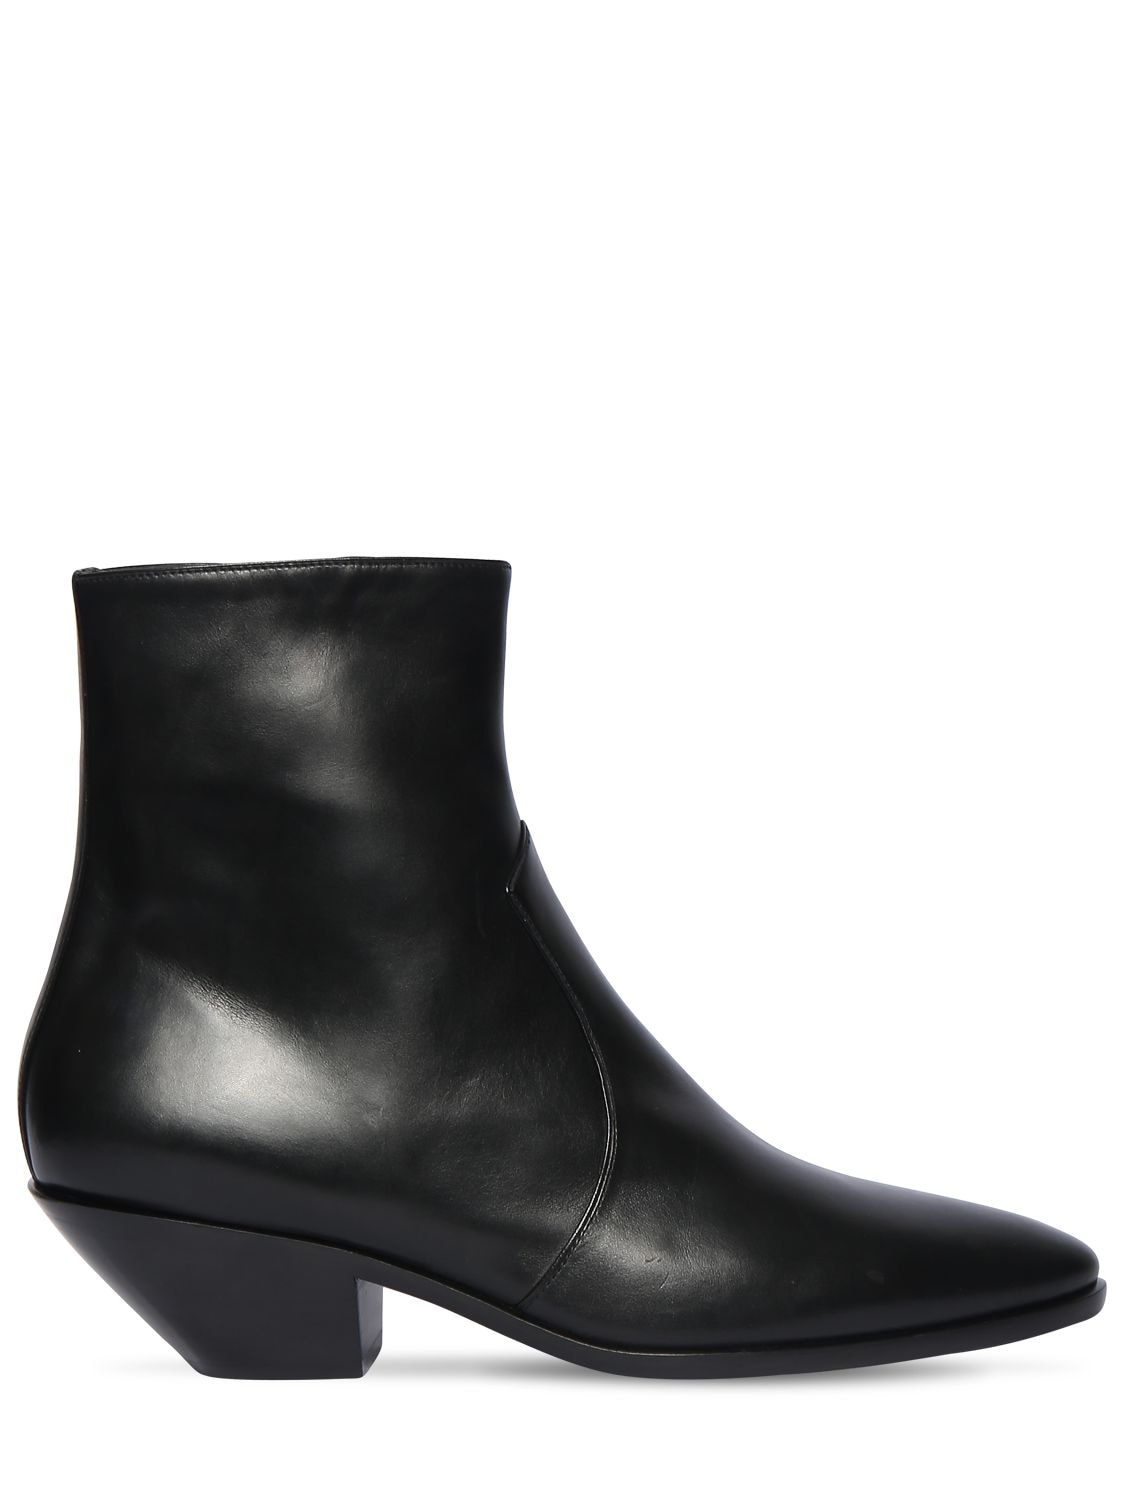 SAINT LAURENT 45MM WESTERN LEATHER ANKLE BOOTS,72I0H0012-MTAWMA2